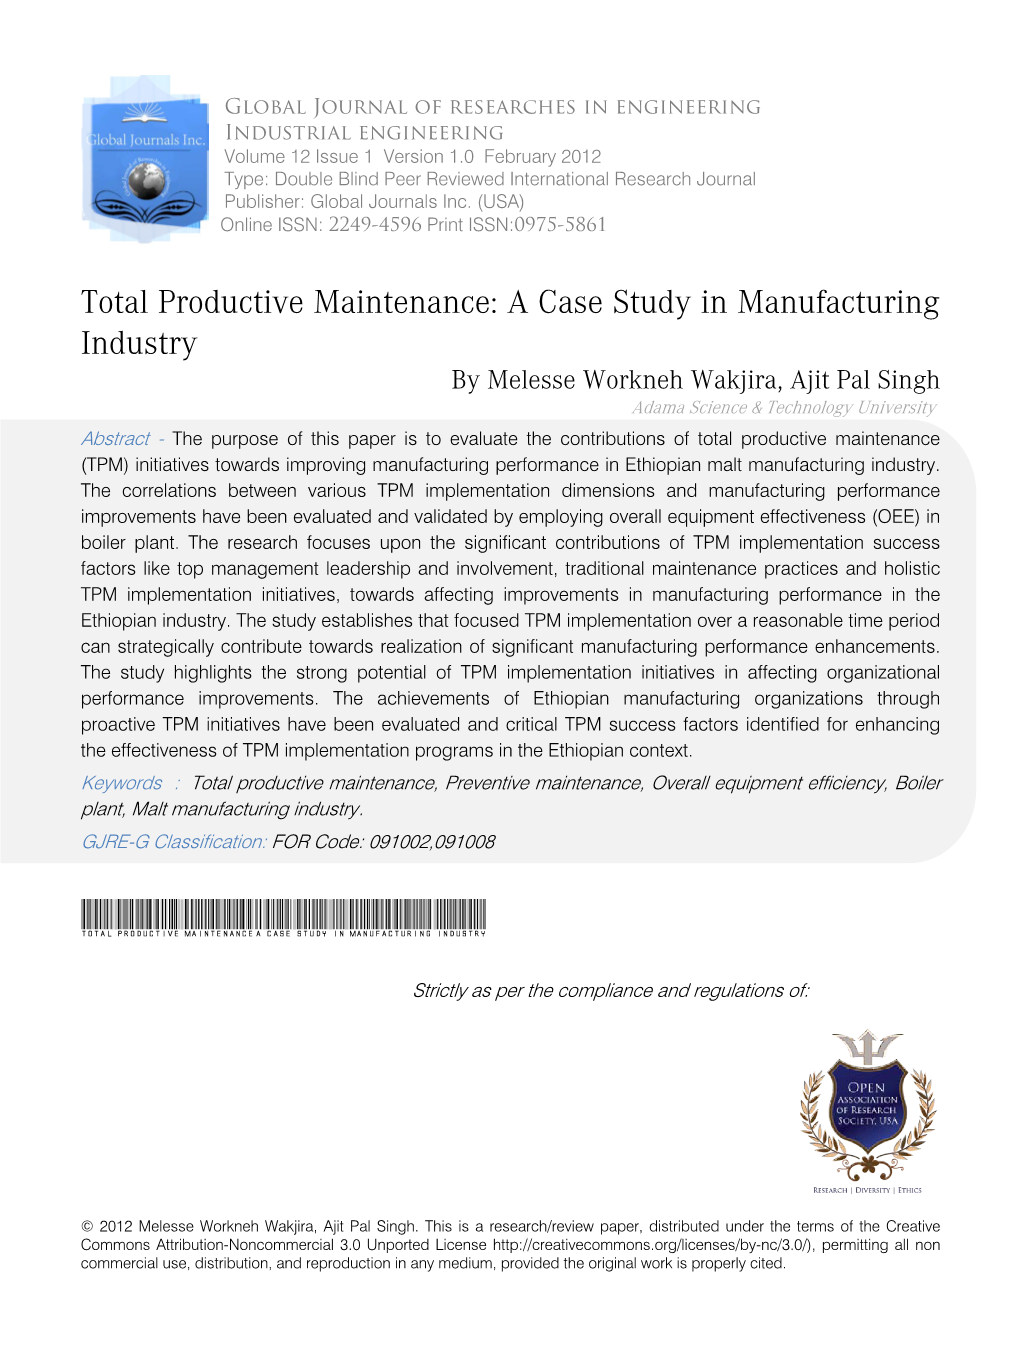 Total Productive Maintenance: a Case Study in Manufacturing Industry